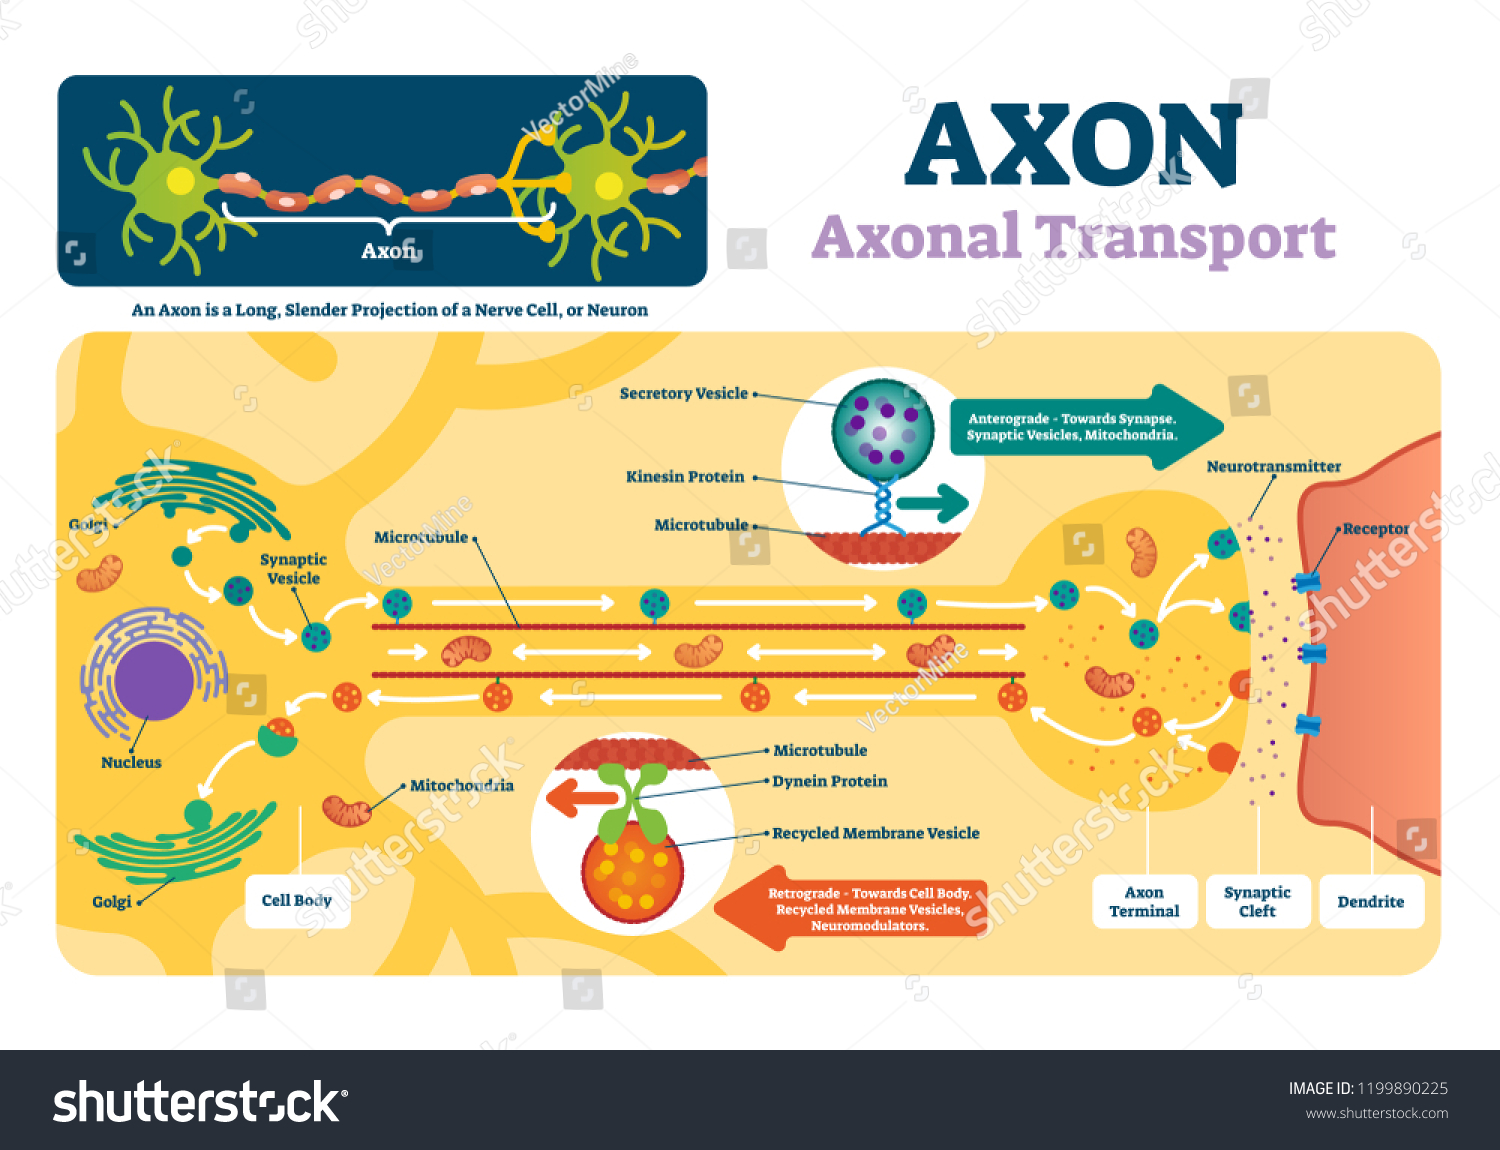 SVG of Axon vector illustration. Labeled diagram with explanation and structure. Closeup with cell body, terminal, synaptic cleft and dendrite. Nerve cell projection or neuron. svg